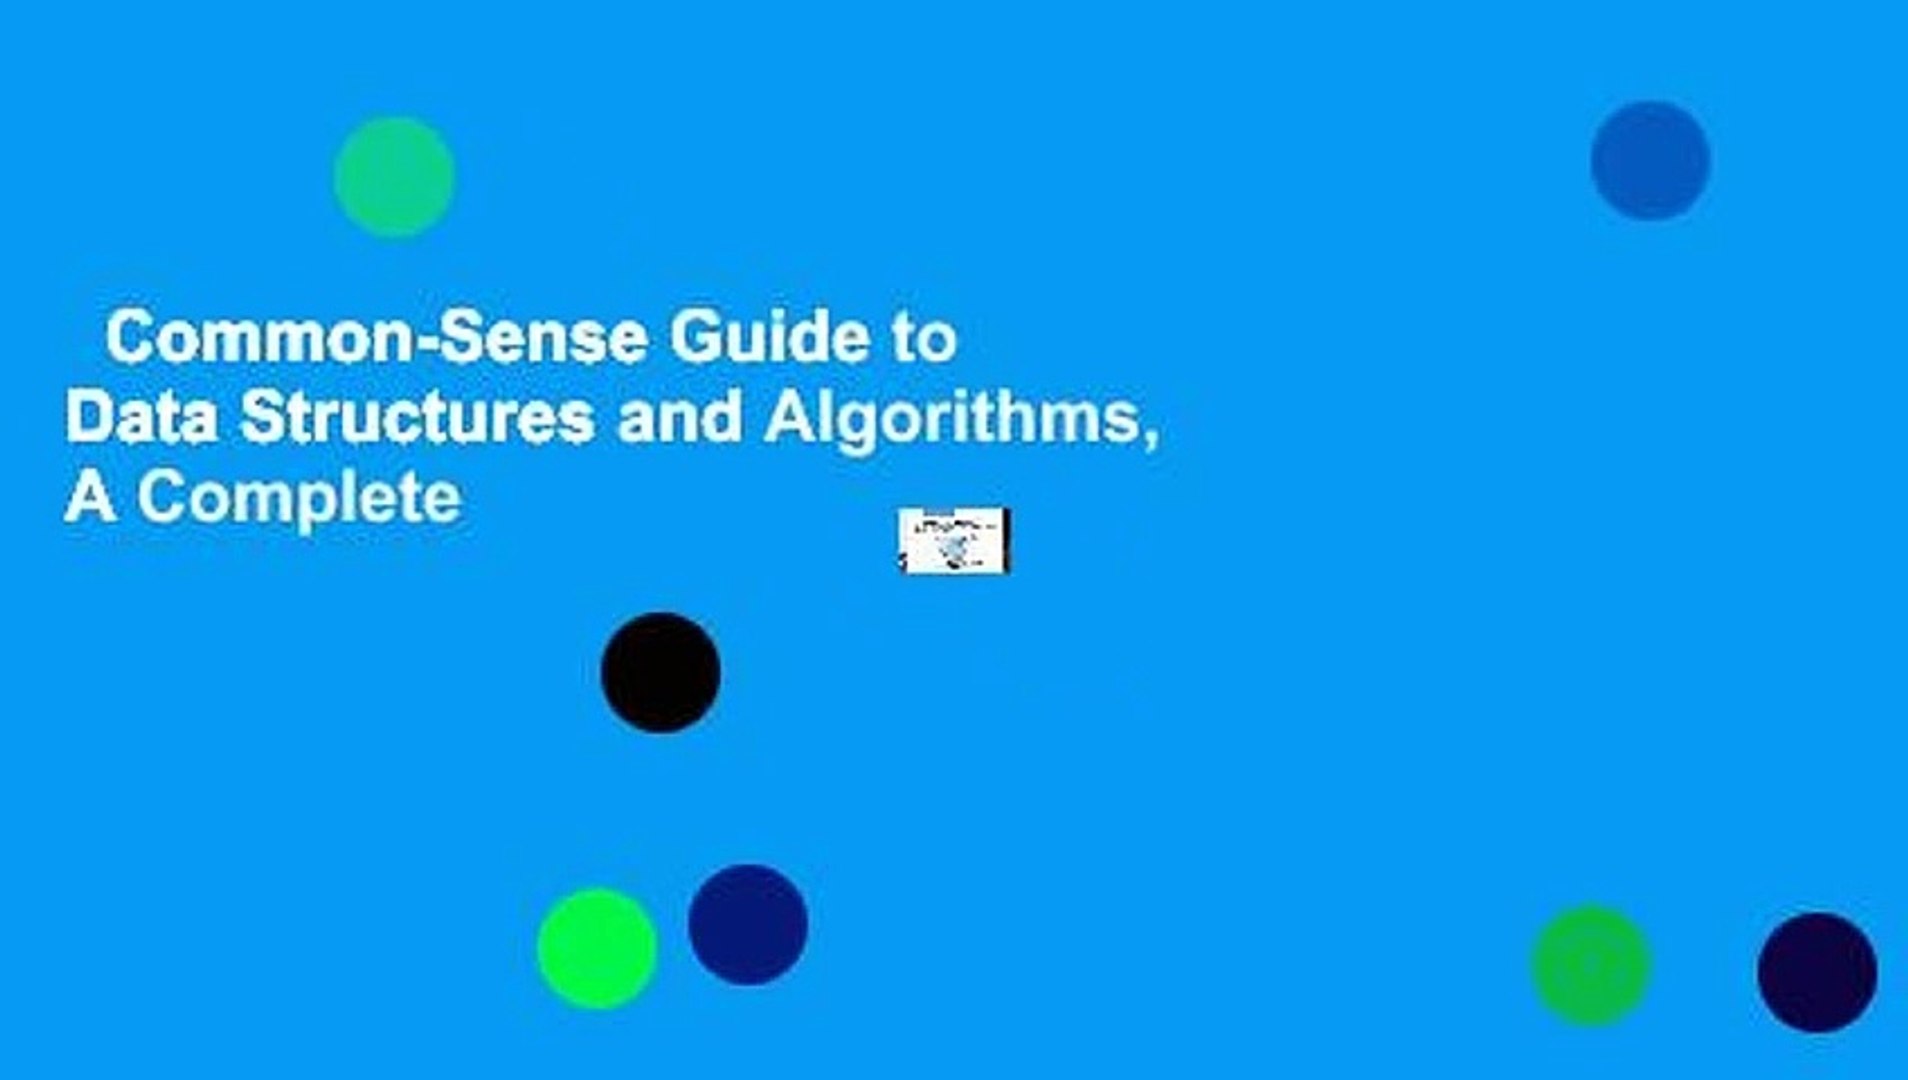 Common-Sense Guide to Data Structures and Algorithms, A Complete